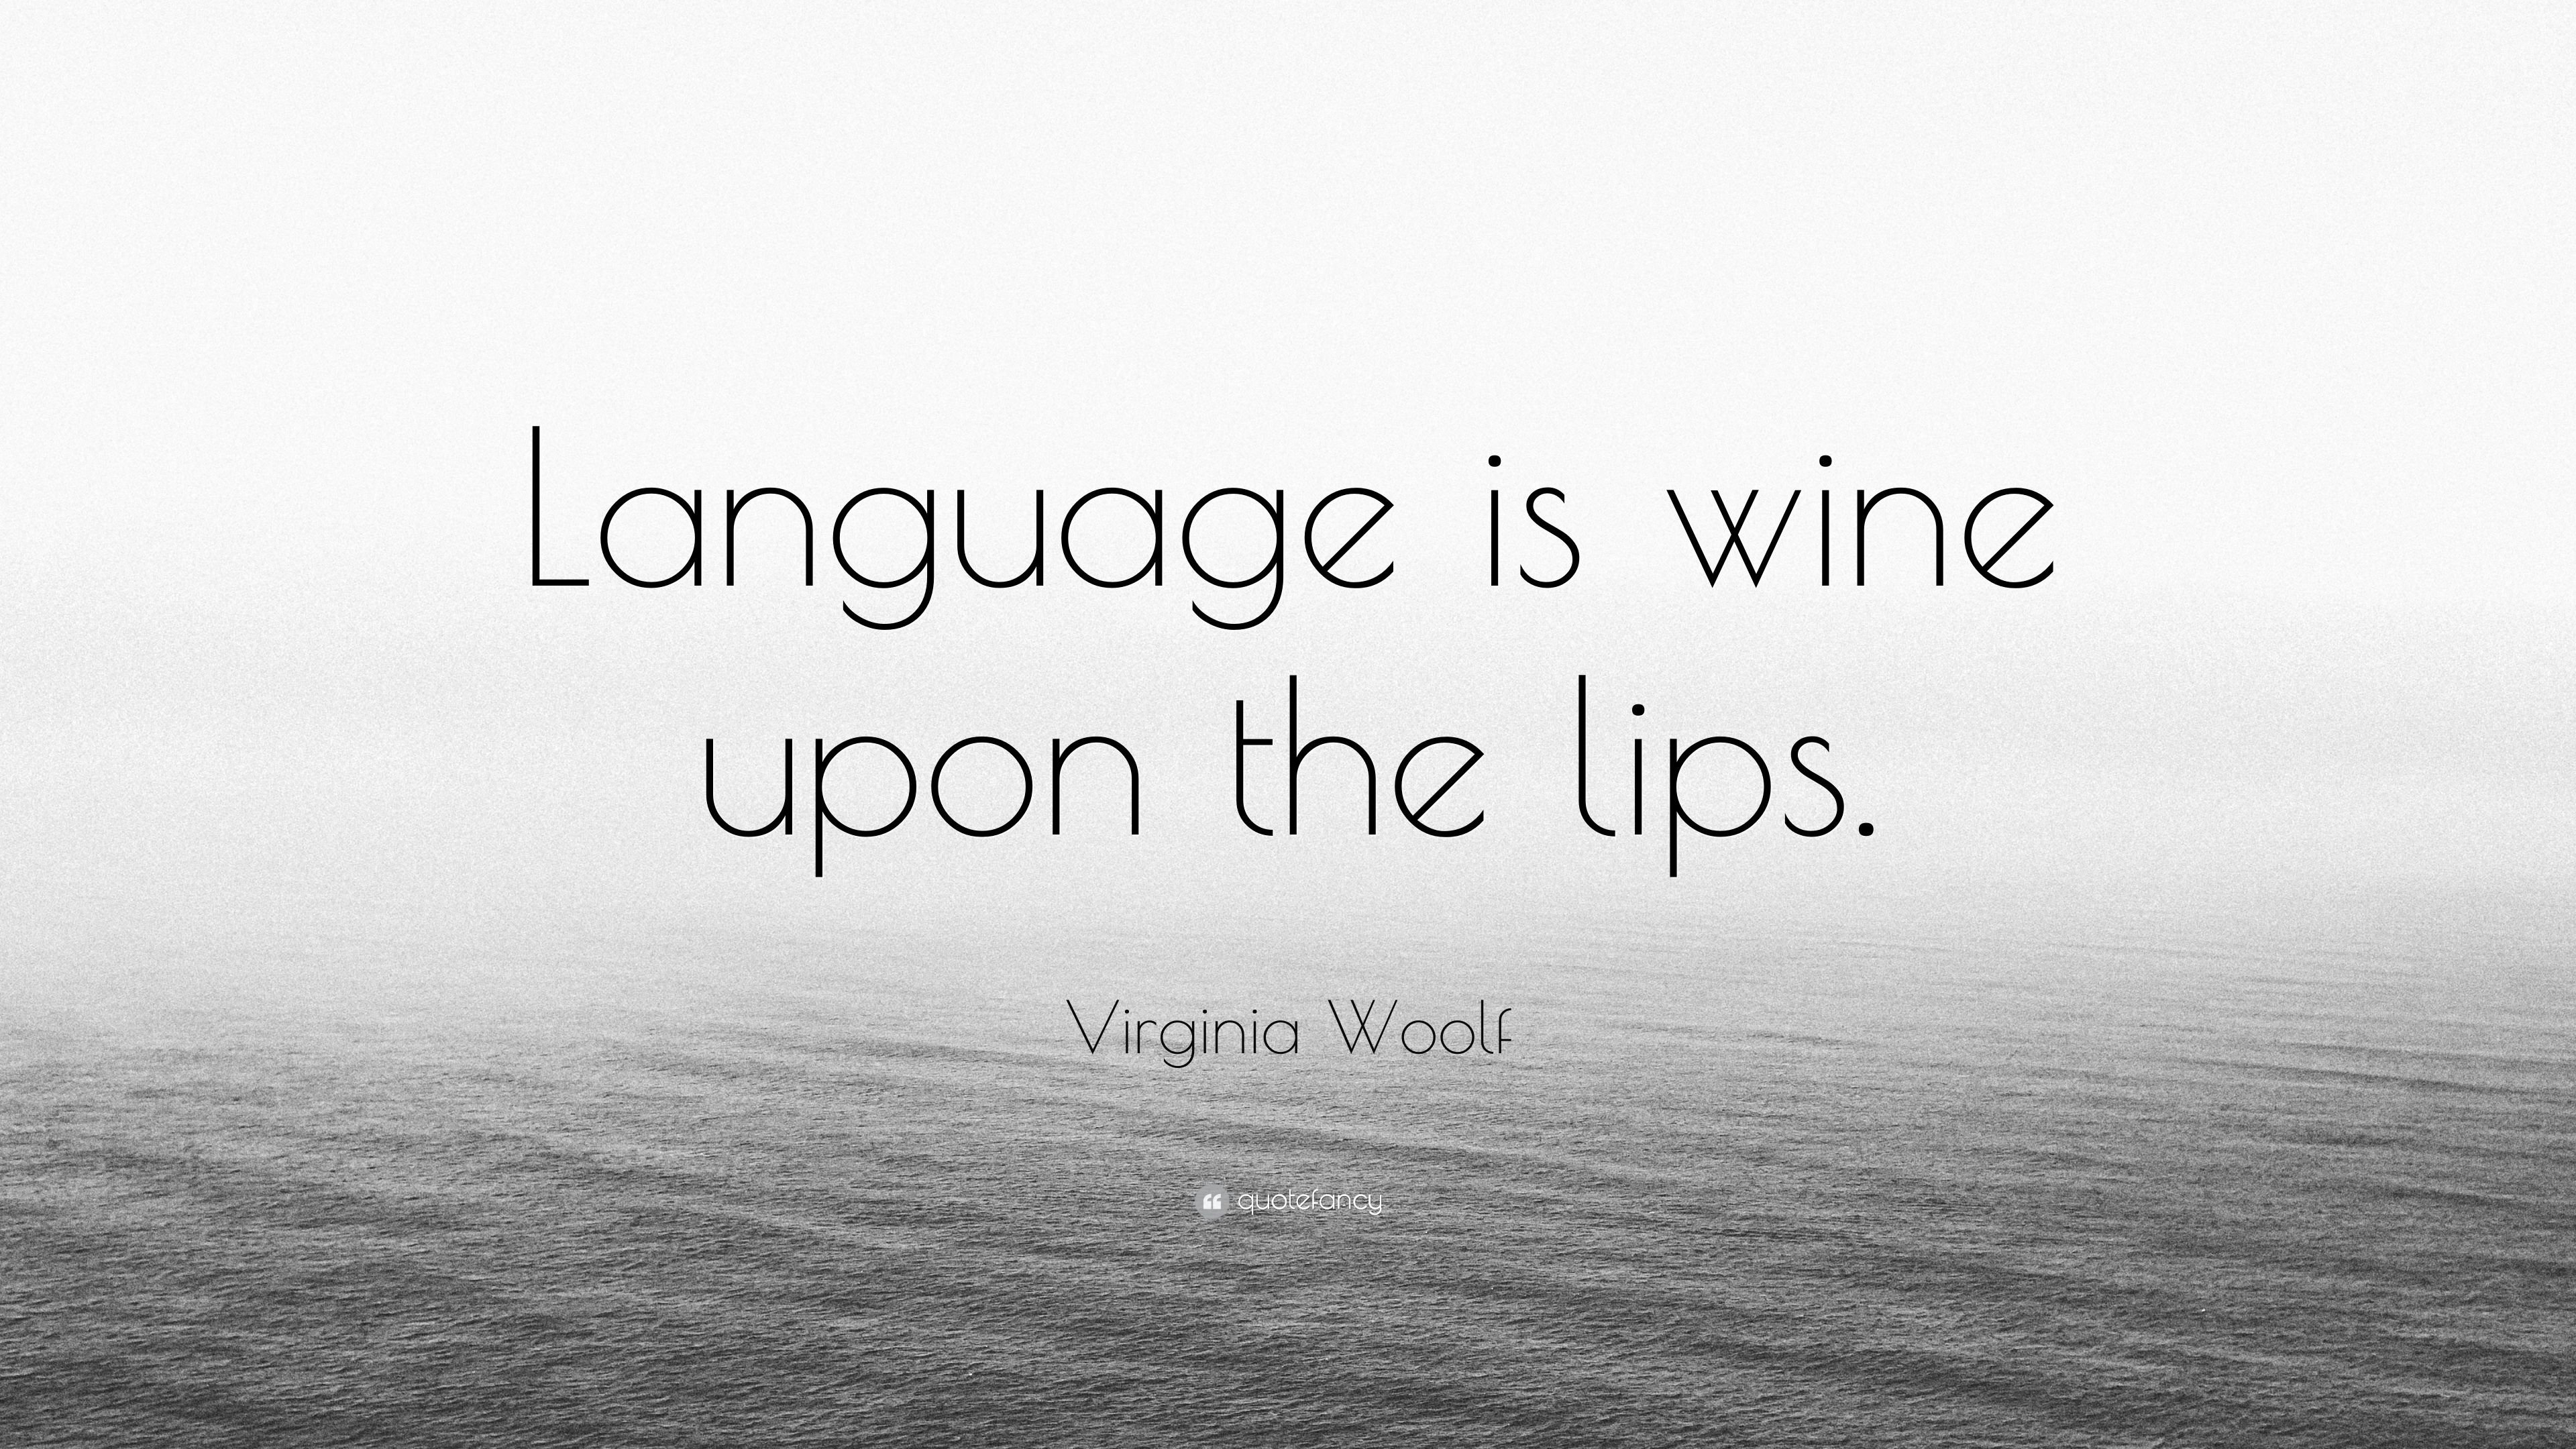 Virginia Woolf Quote: “Language is wine upon the lips.” 9